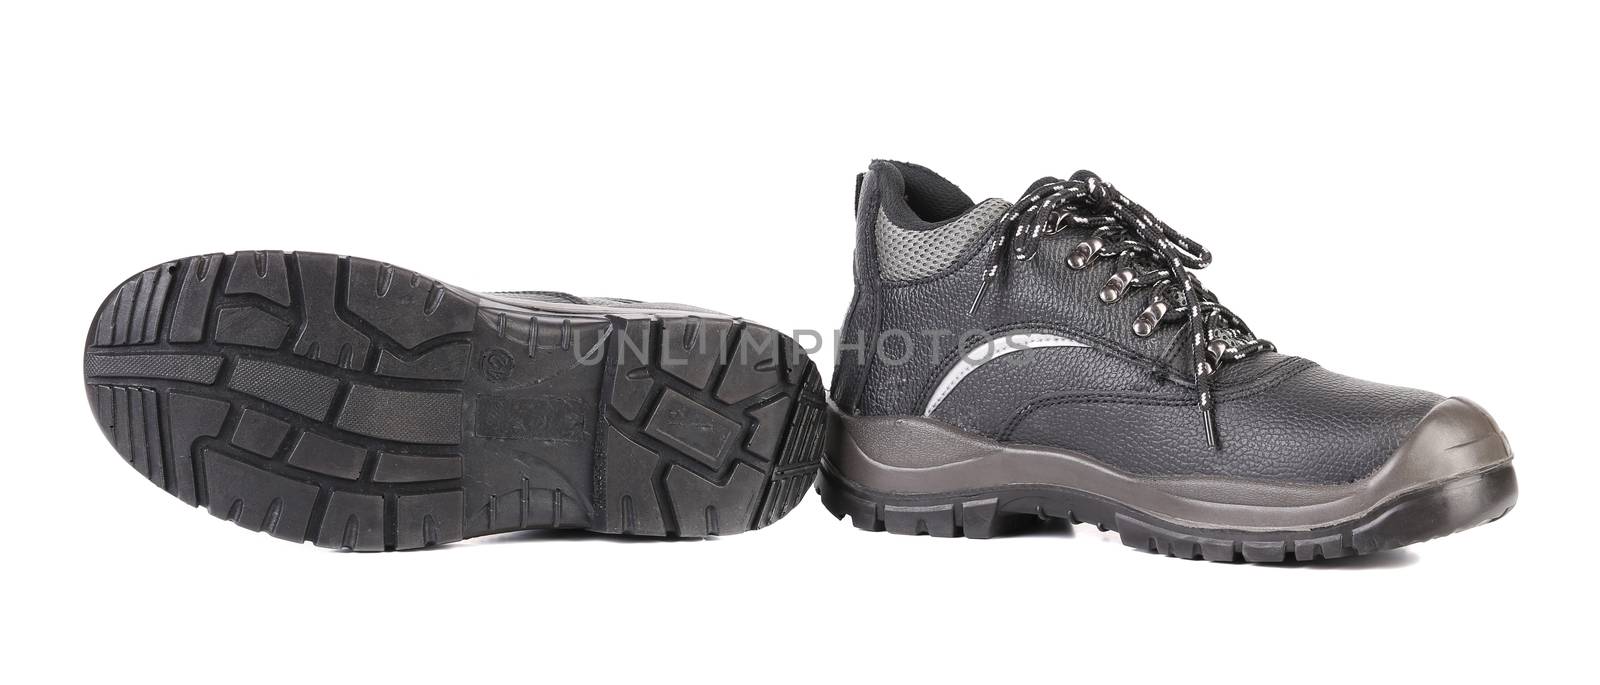 Working boots of black color. Isolated on white background.